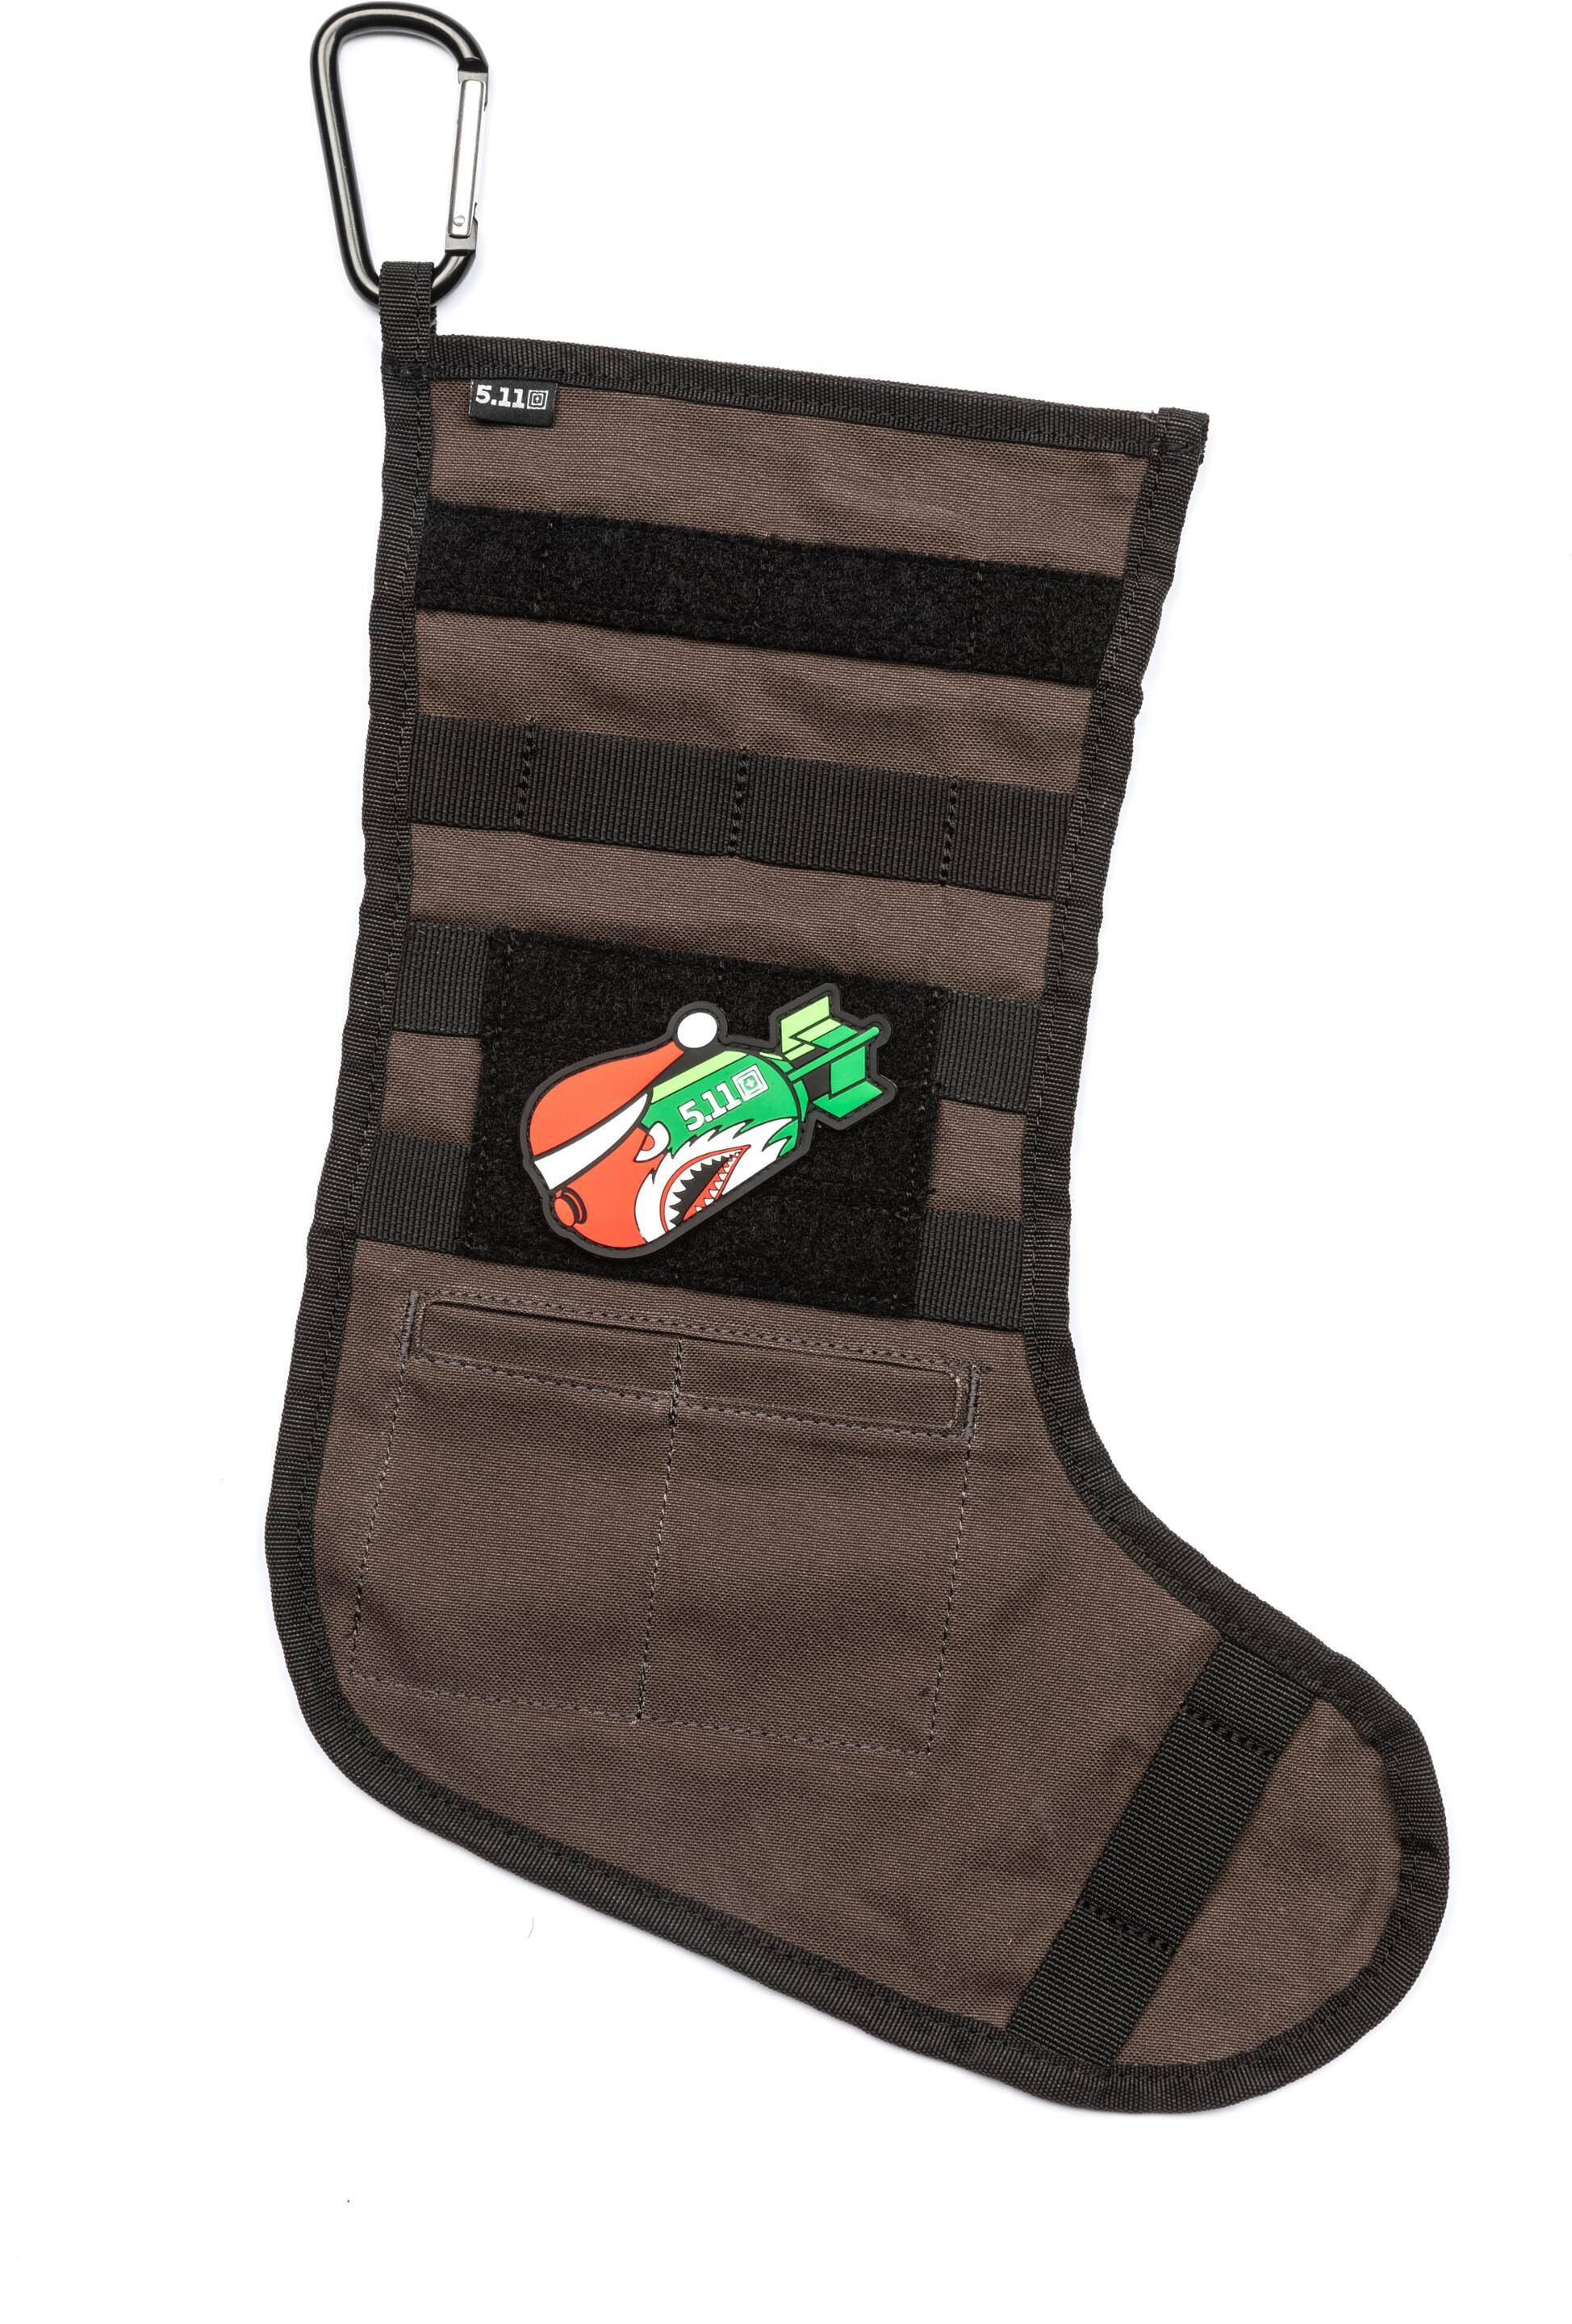 5.11 TACTICAL HOLIDAY STOCKING